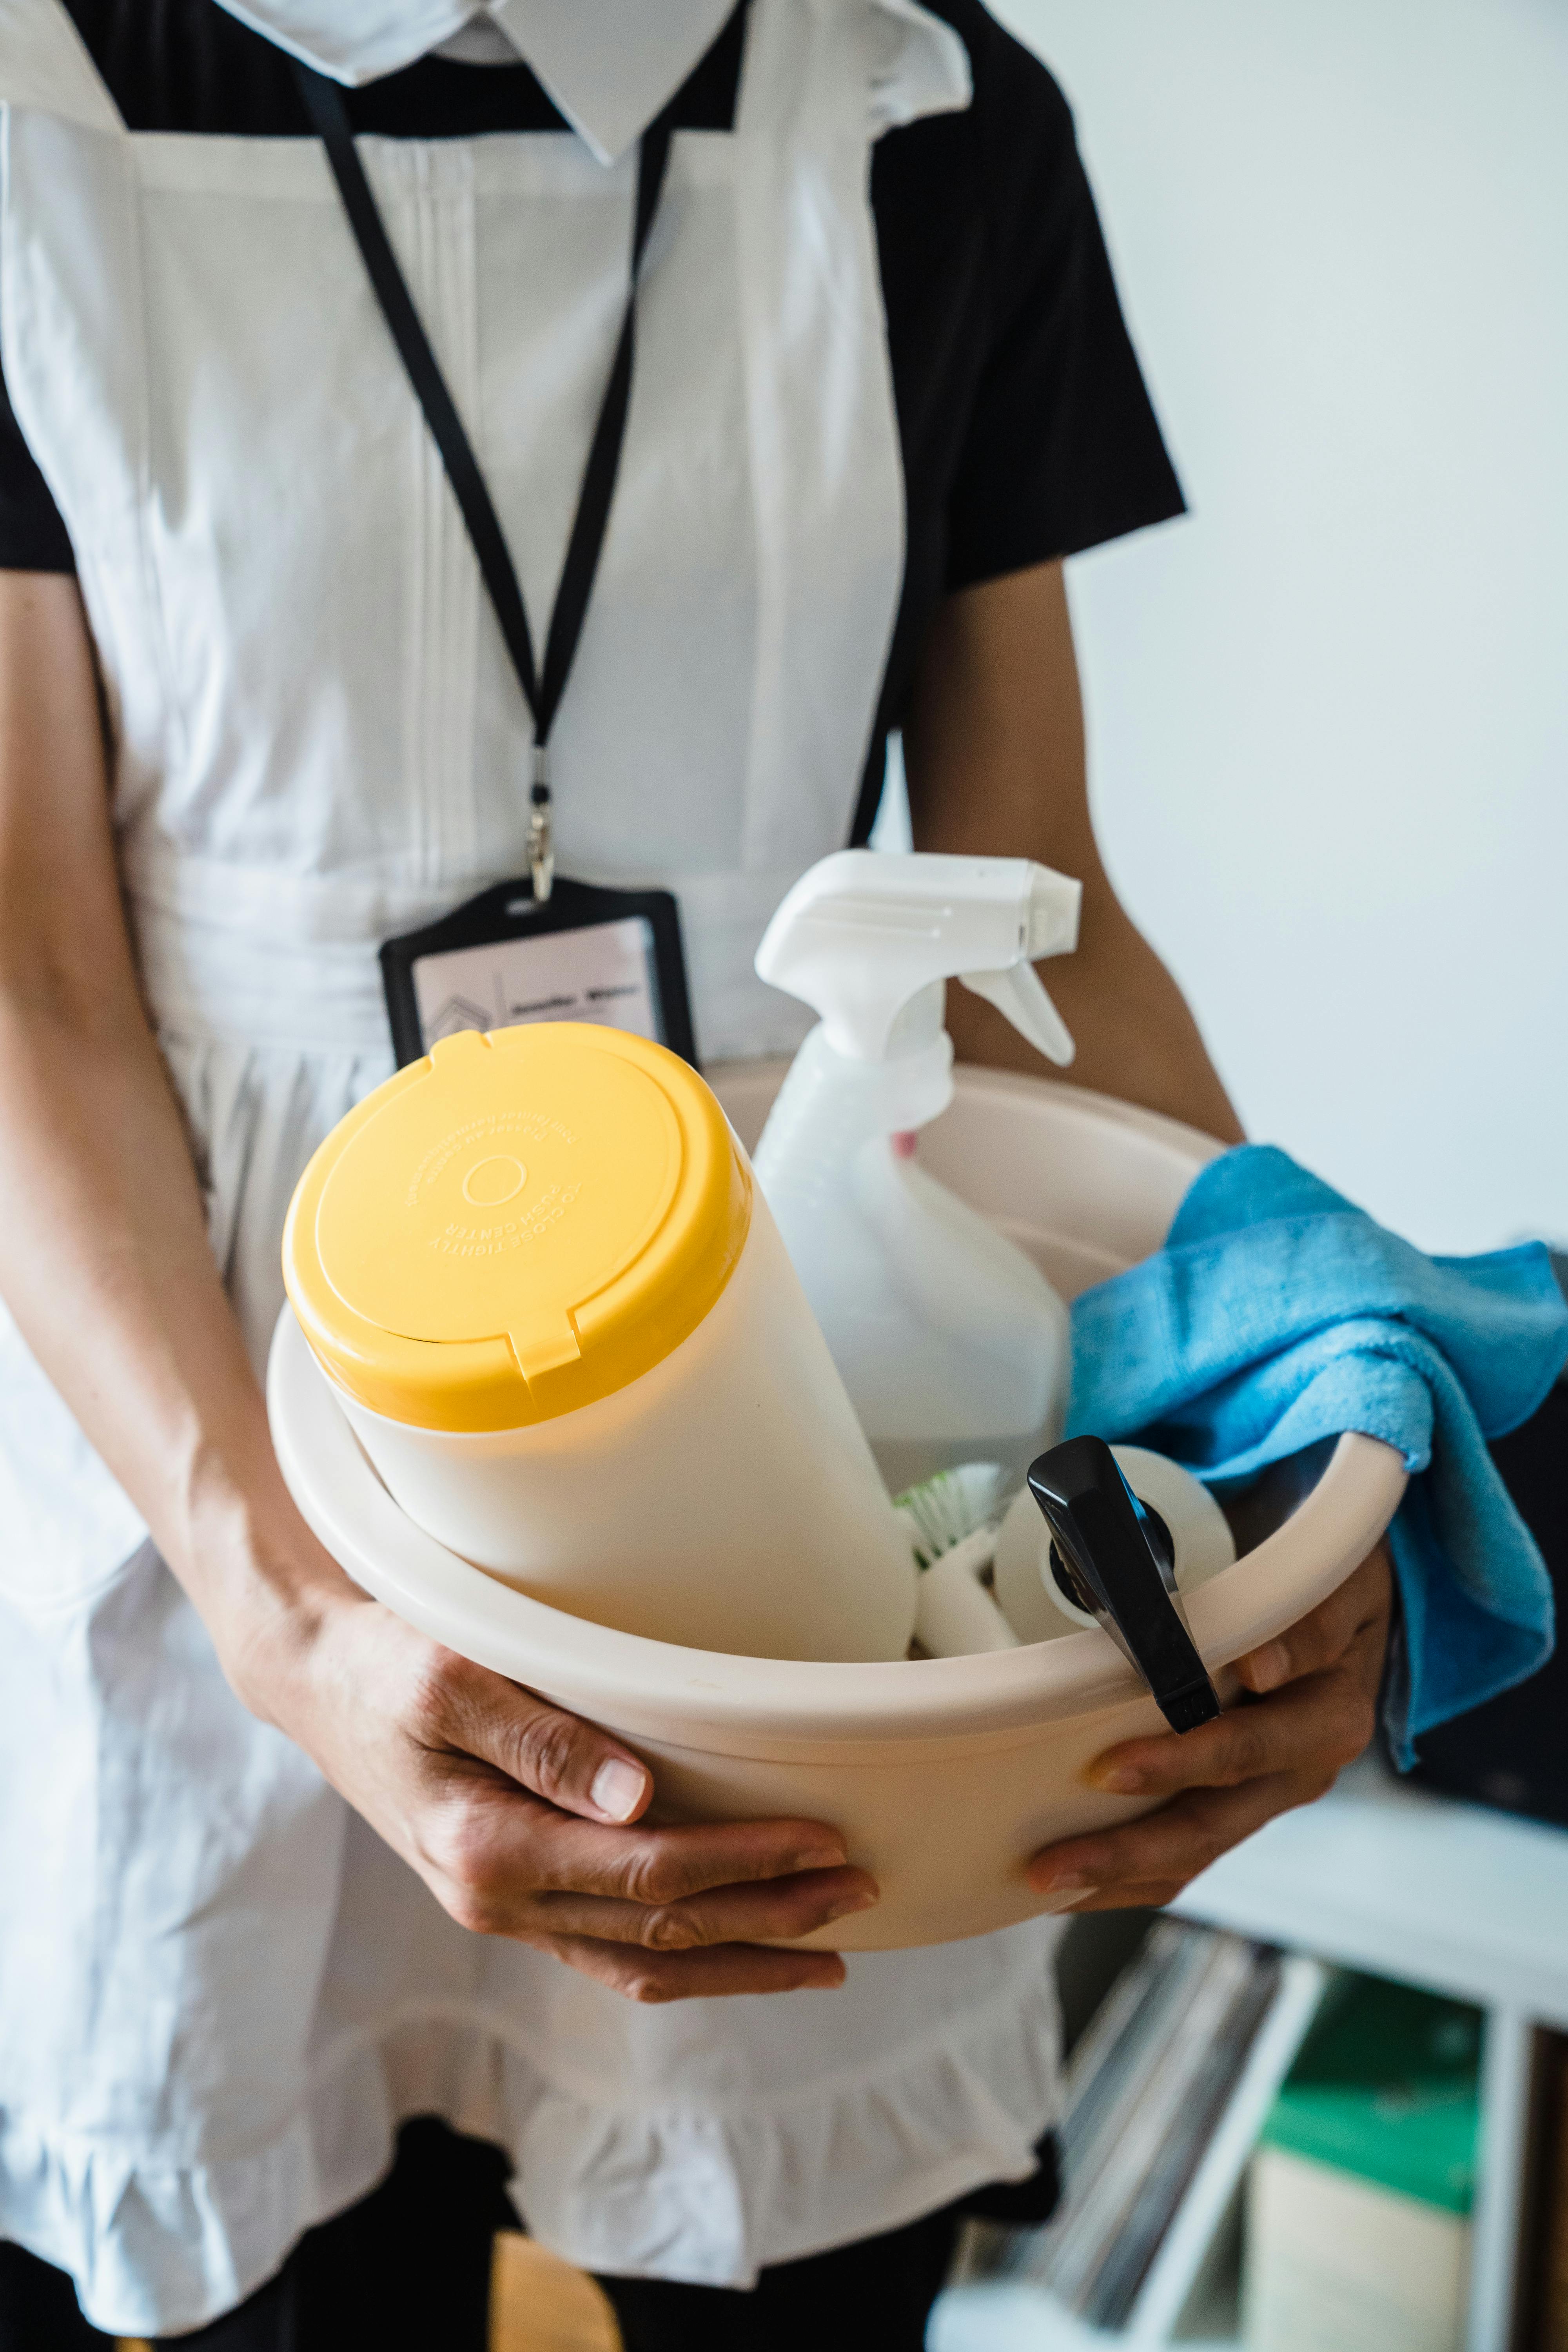 Woman holding a plastic basin with cleaning materials | Source: Pexels